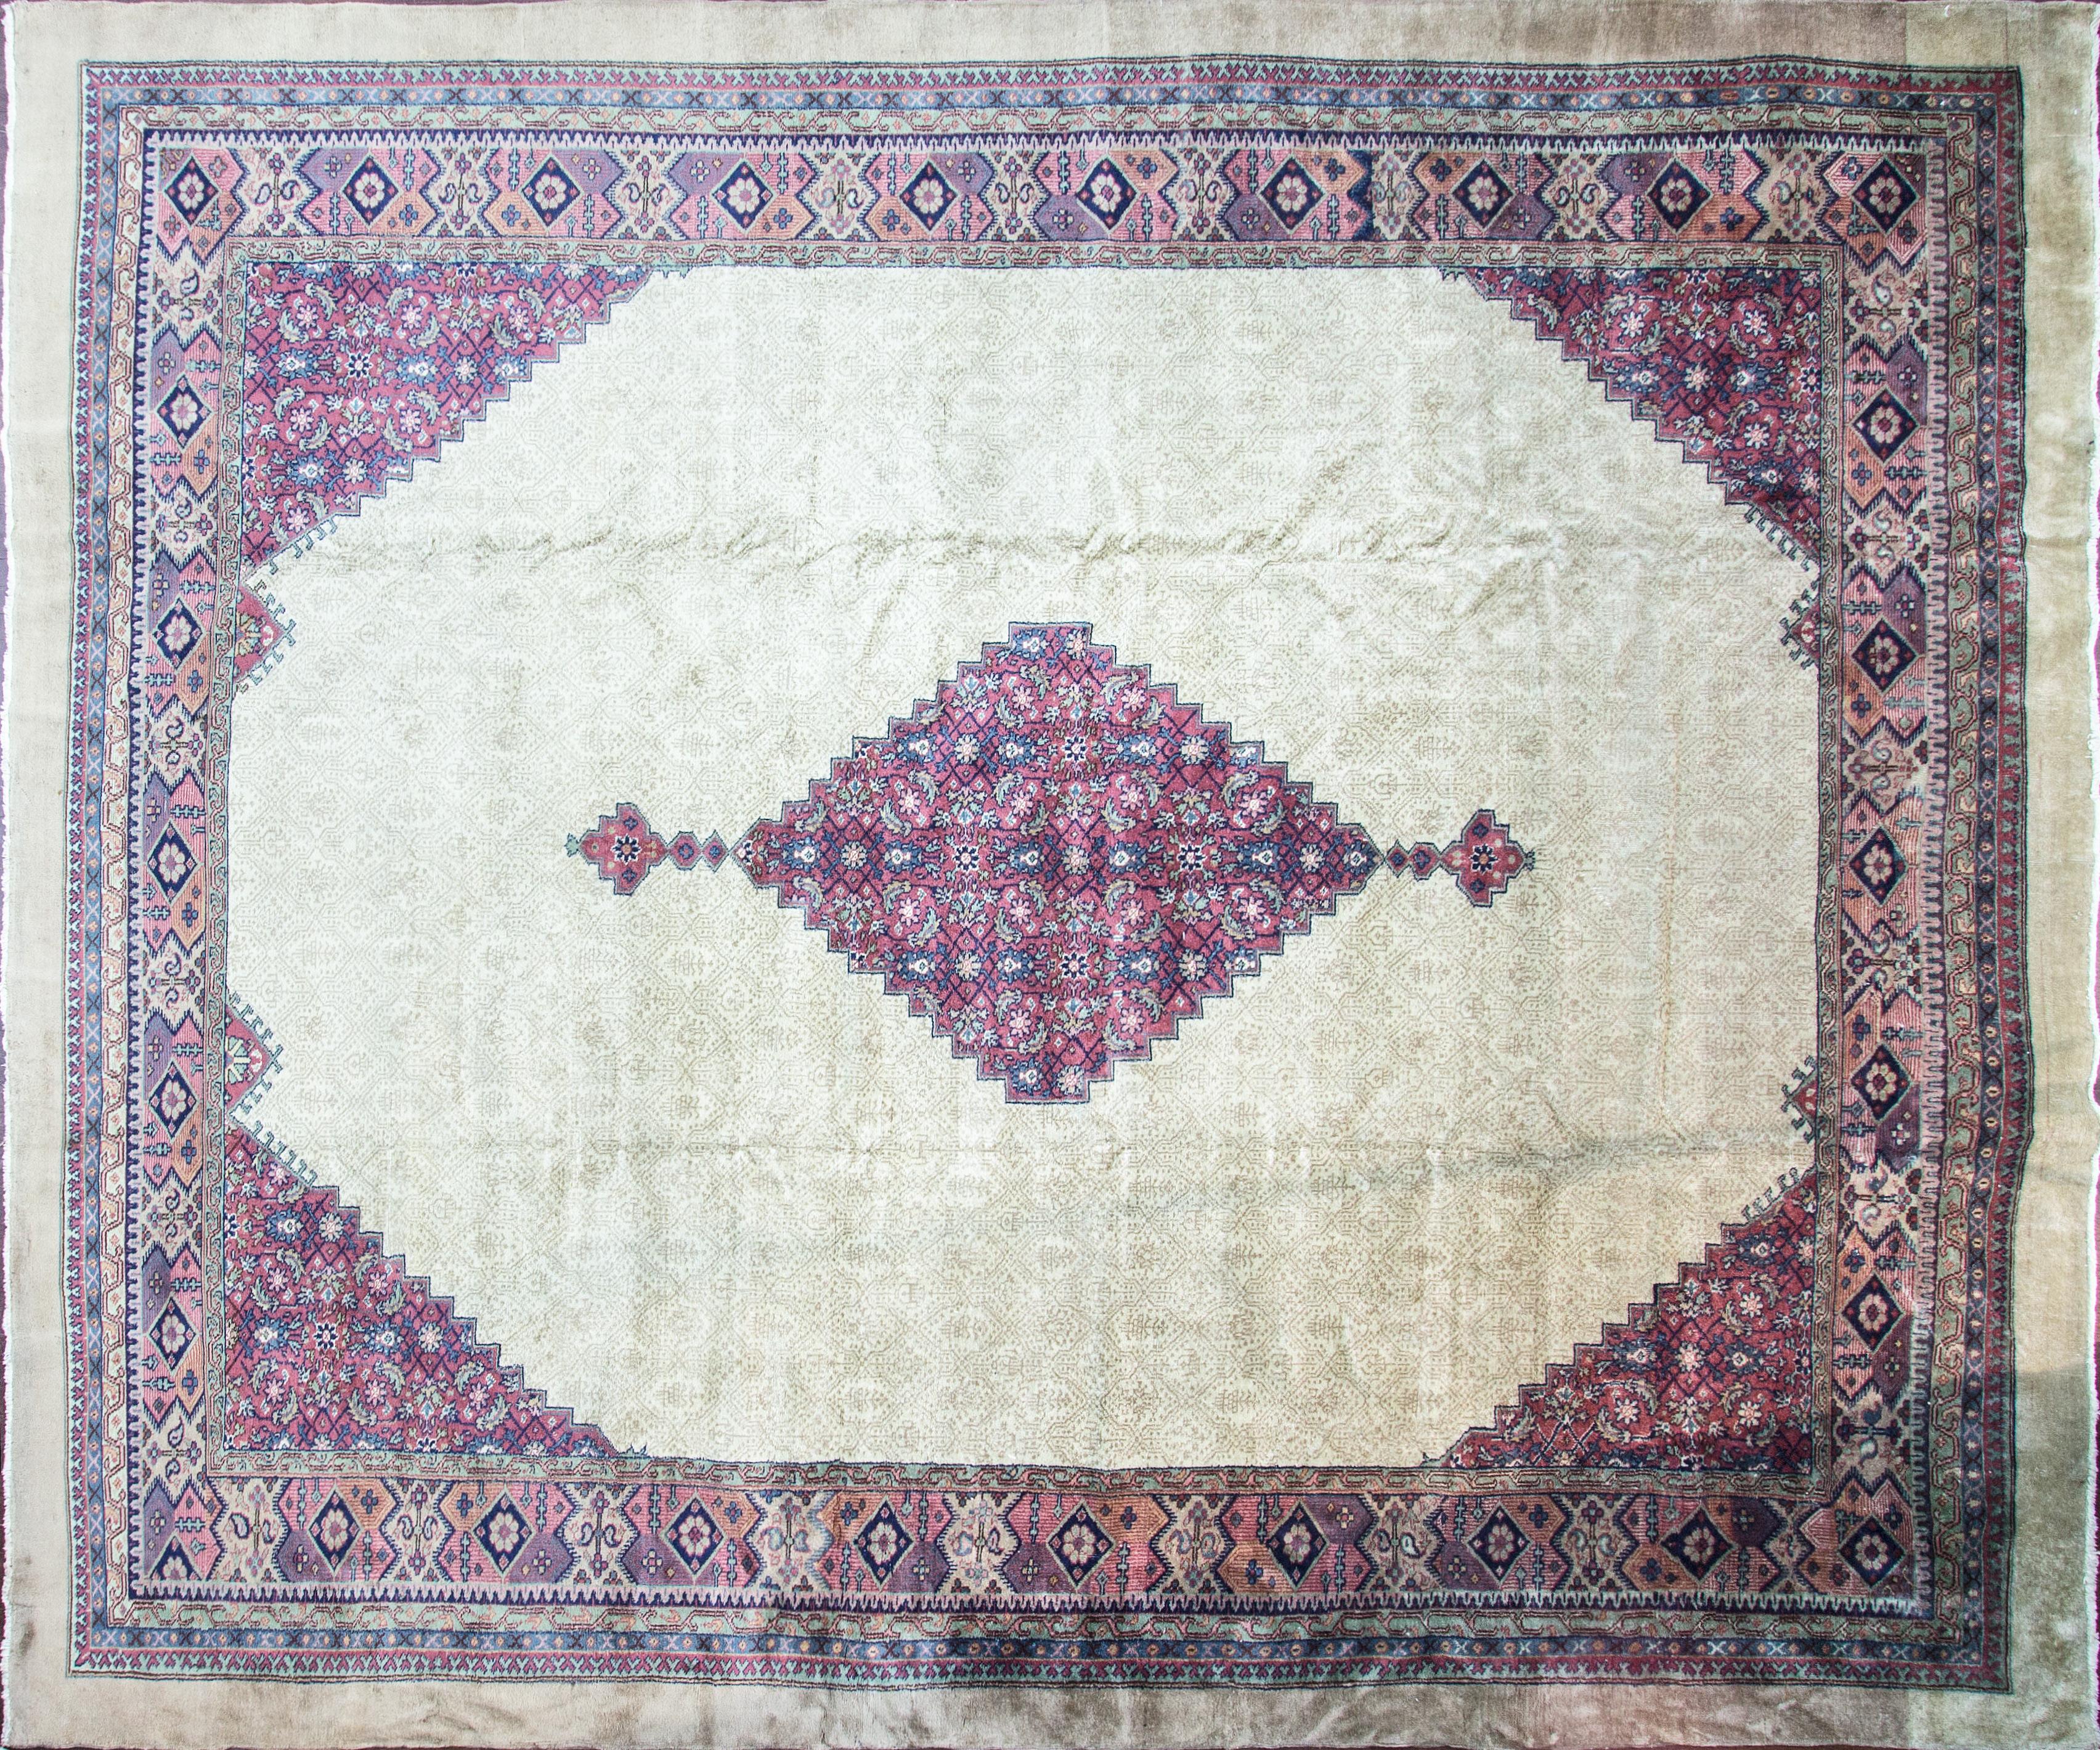 Antique Turkish Serab carpet. Measure: 12' x 14'.
Serab rugs are known mostly for their fine long rugs or runners and occasionally large room-sized rugs are also found with a characteristic camel ground and lozenge-shaped medallions, camel-colored